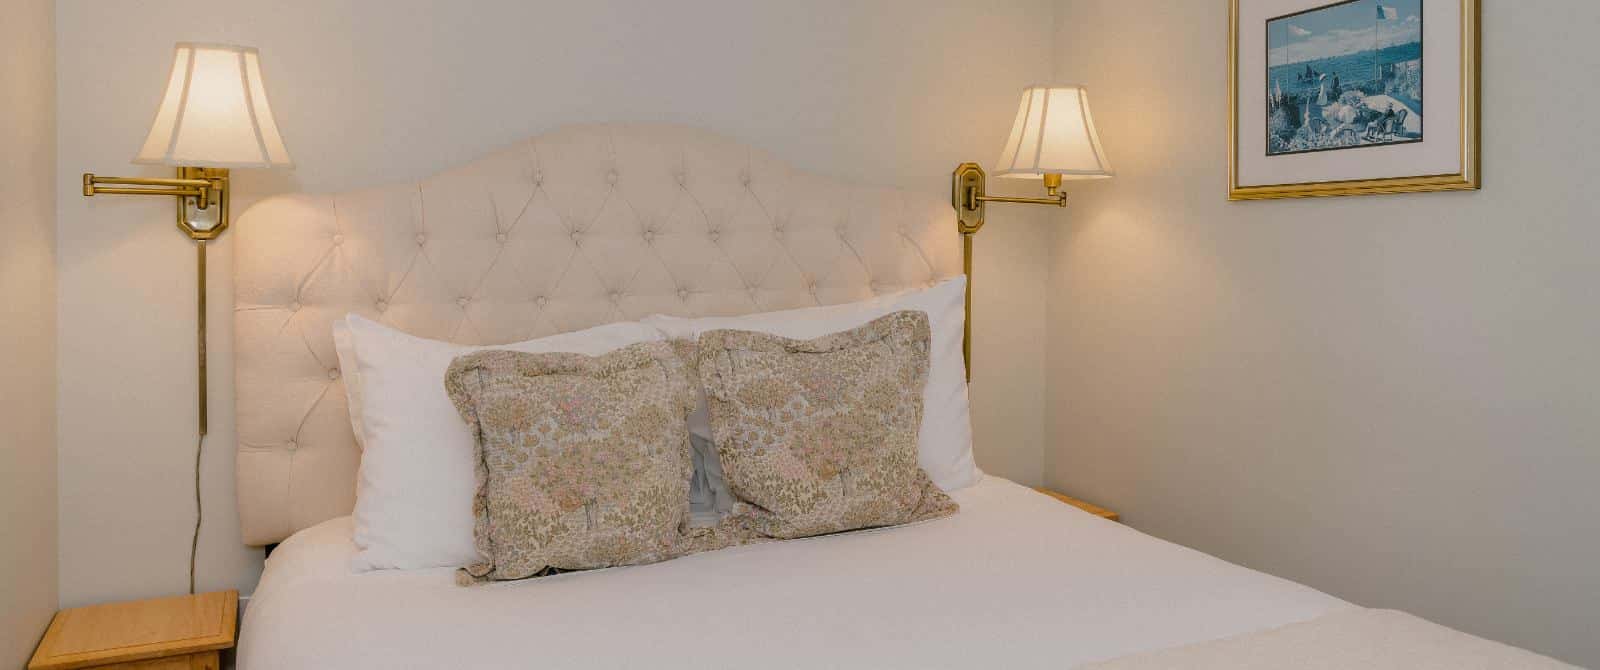 Close up view of bed with cream upholstered headboard, white bedding, and brass wall sconces